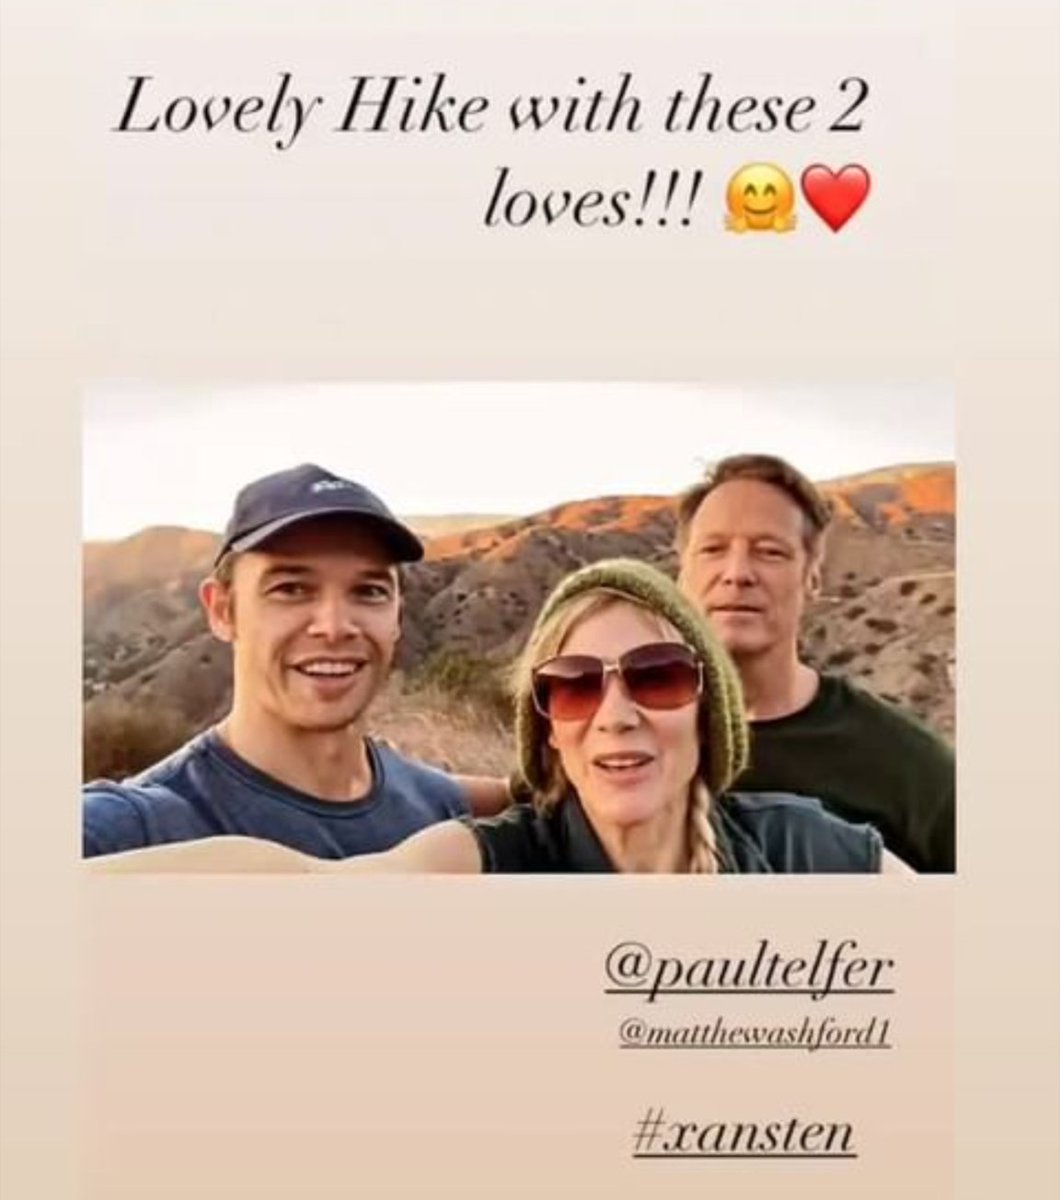 So much love, light and friendship.
From Paul IG 📸 story 🌞🏃🏞️
#hikelife #xansten